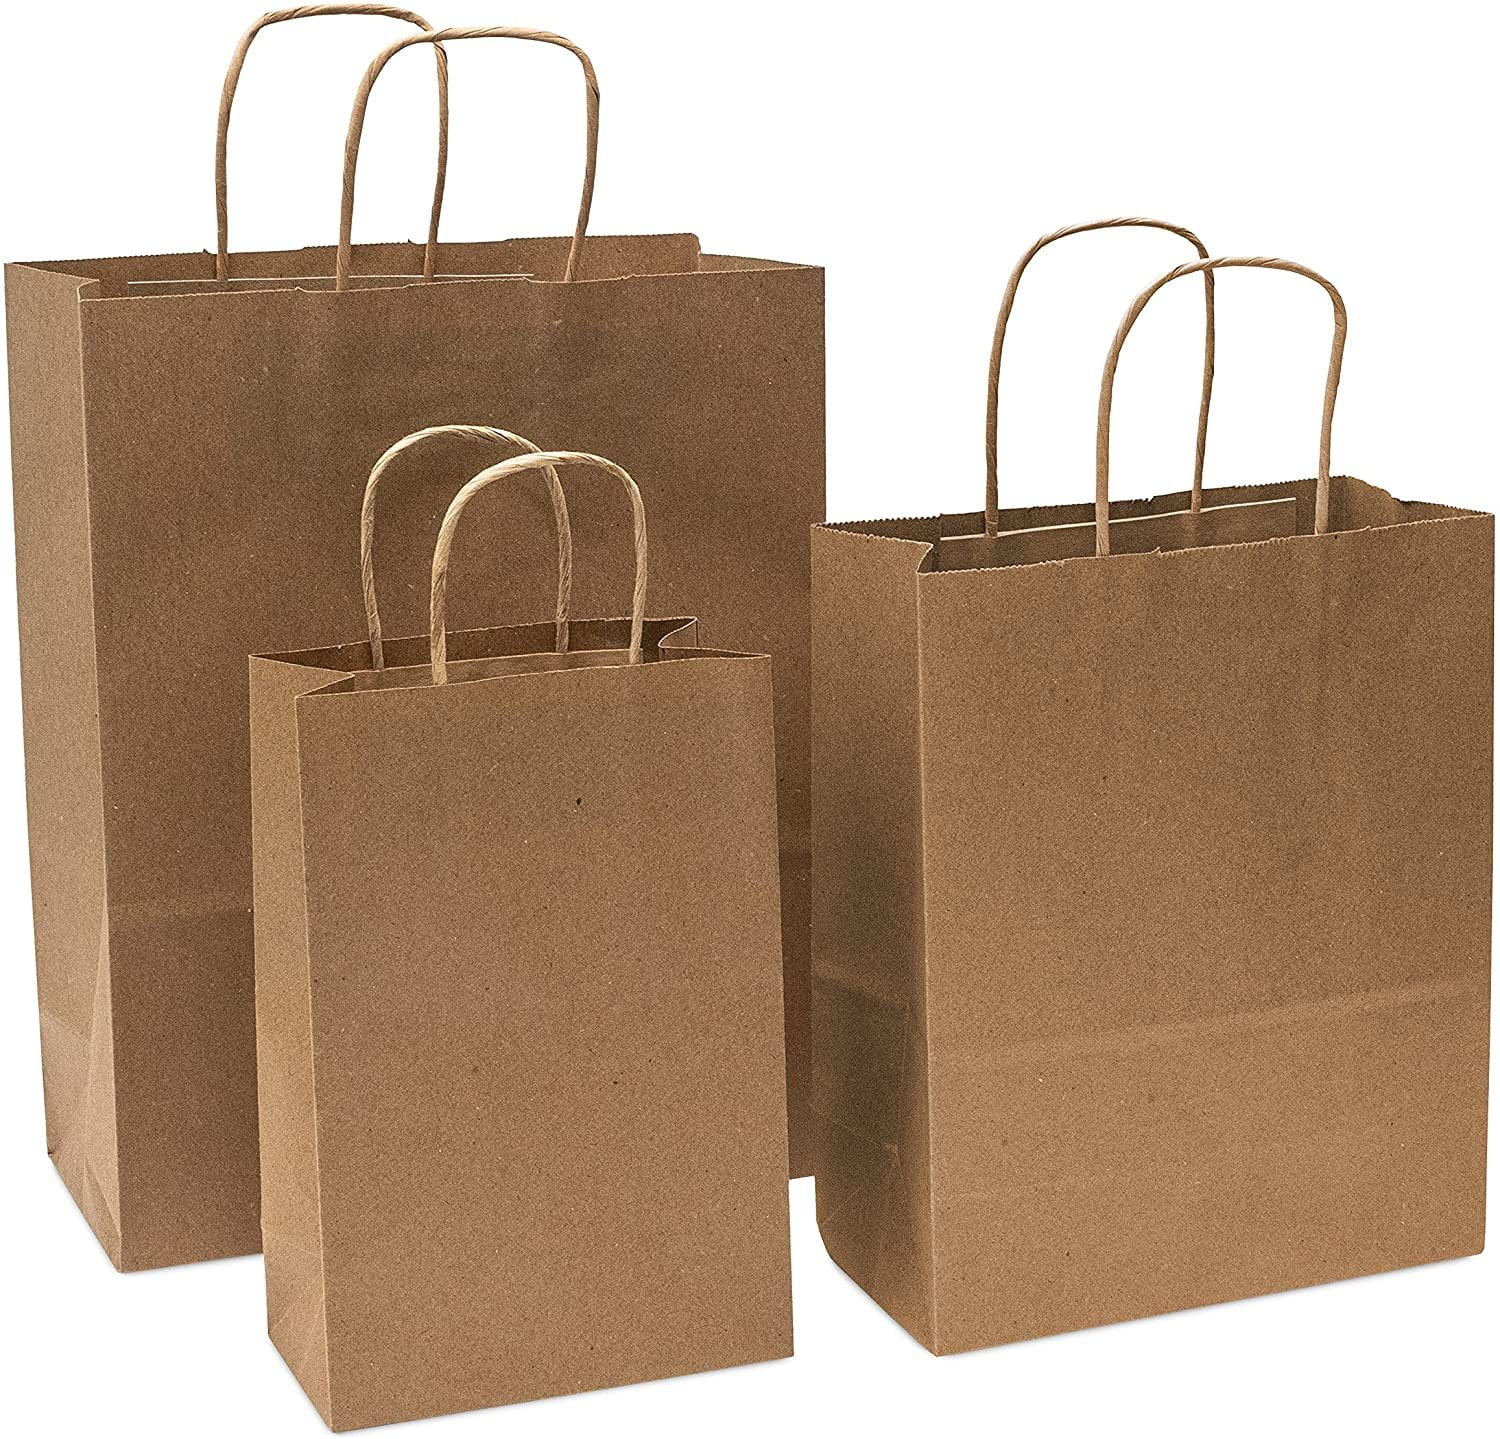 Small Brown Paper Bags with Handles Small Business Restaurants Birthday Parties Take Out Gifts 6x3x9 Inch 50 Pack Kraft Shopping Bags Merchandise Bulk Retail Stores Craft Totes for Boutiques 